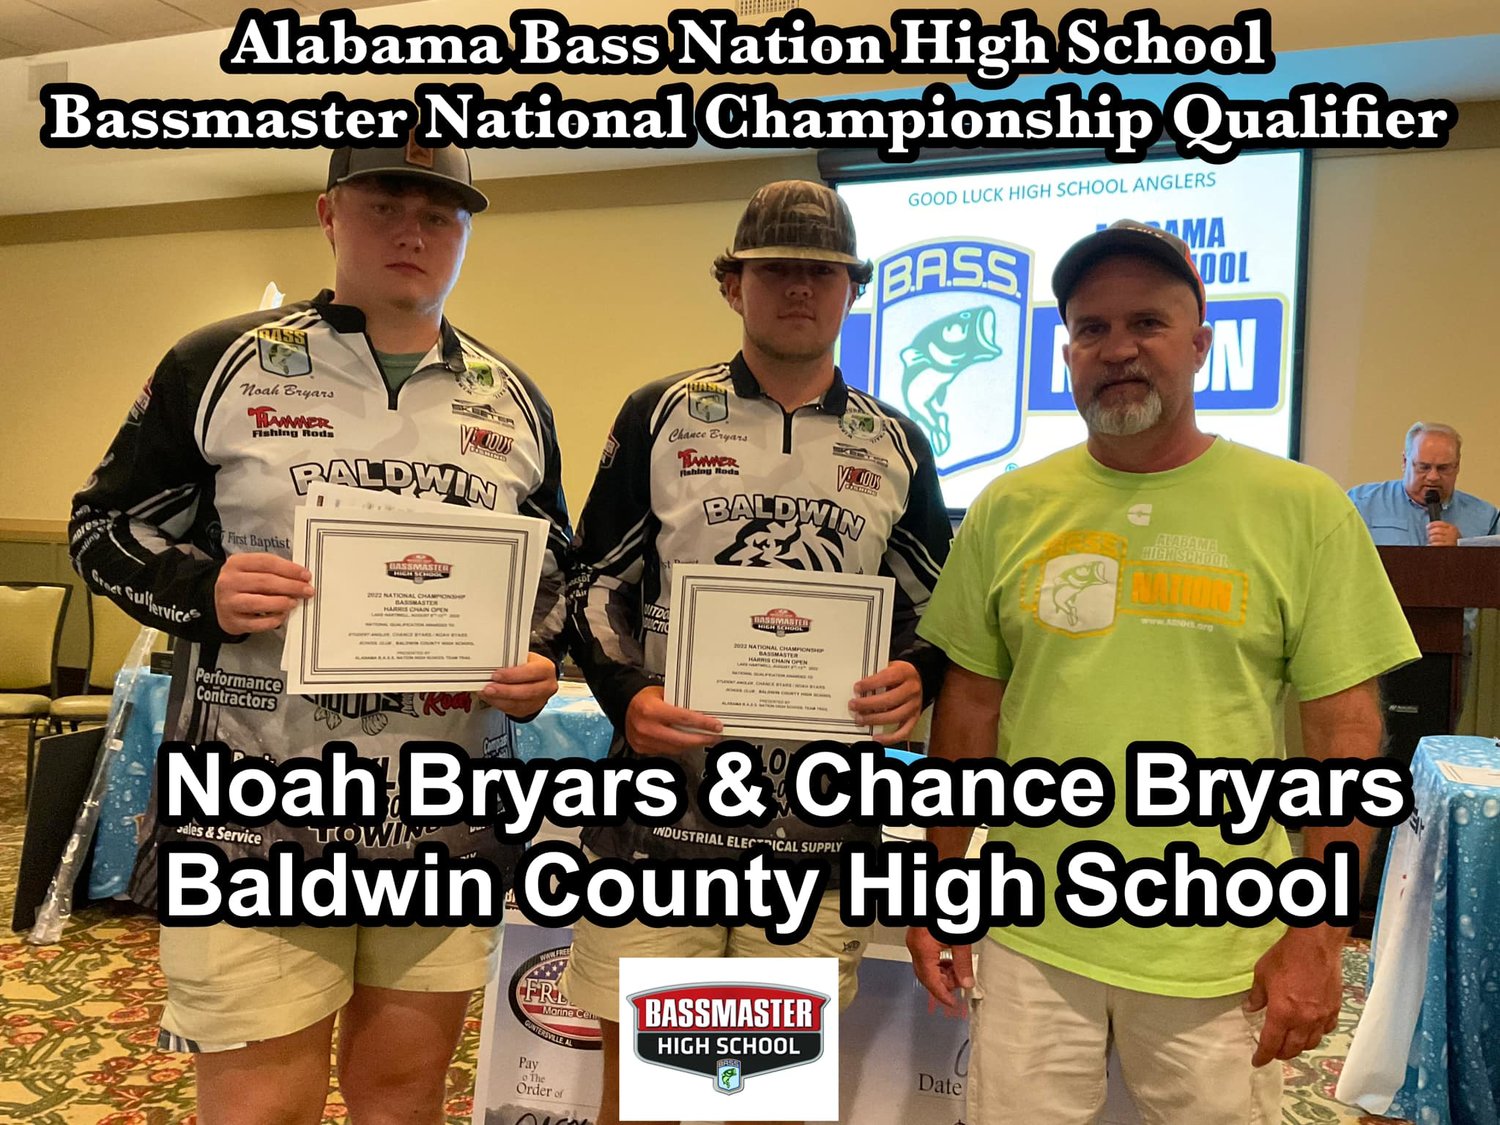 Noah and Chance Bryars are one of two Baldwin County High School duos to qualify for the  Alabama Bass Nation High School Bassmaster National Championship.